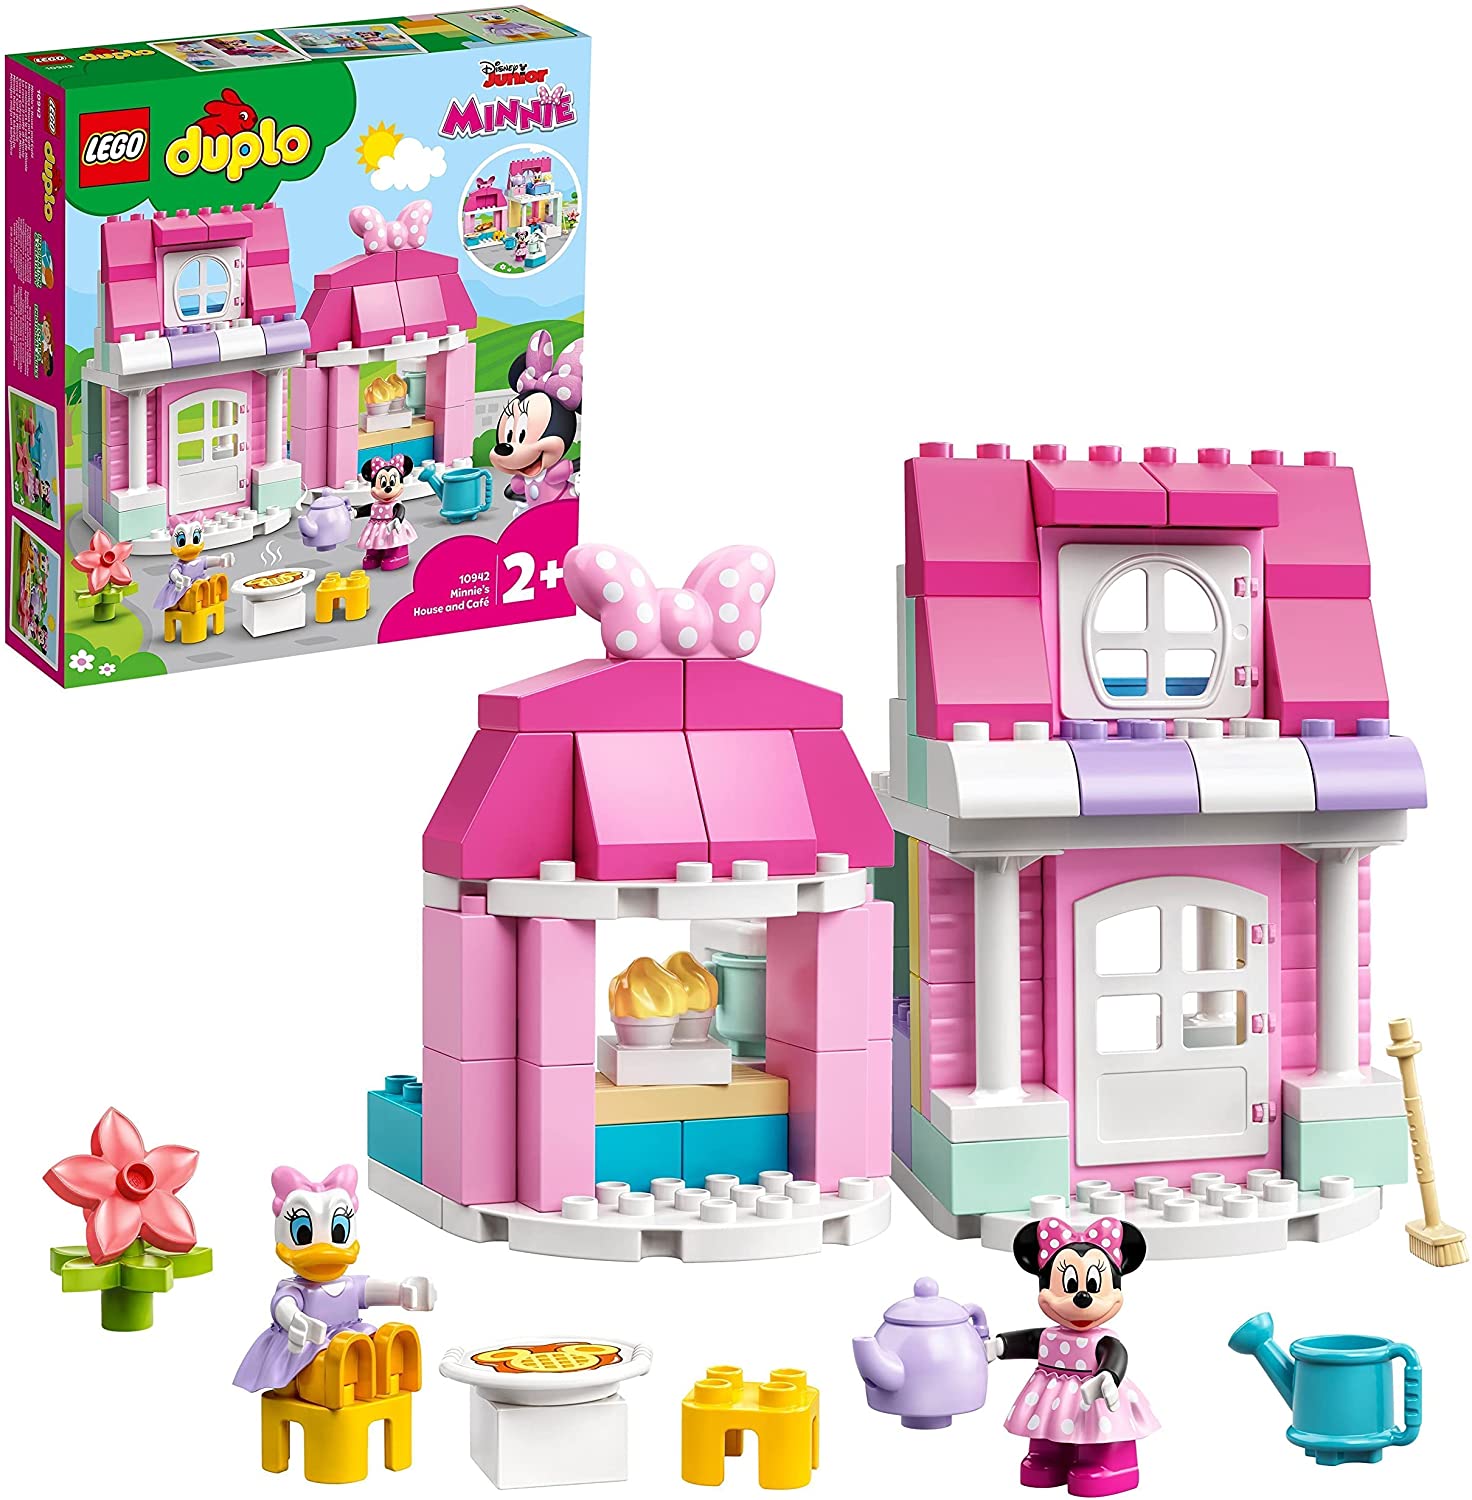 LEGO Duplo 10942 Disney Minnies House with Café, Minnie Mouse Toy for Build